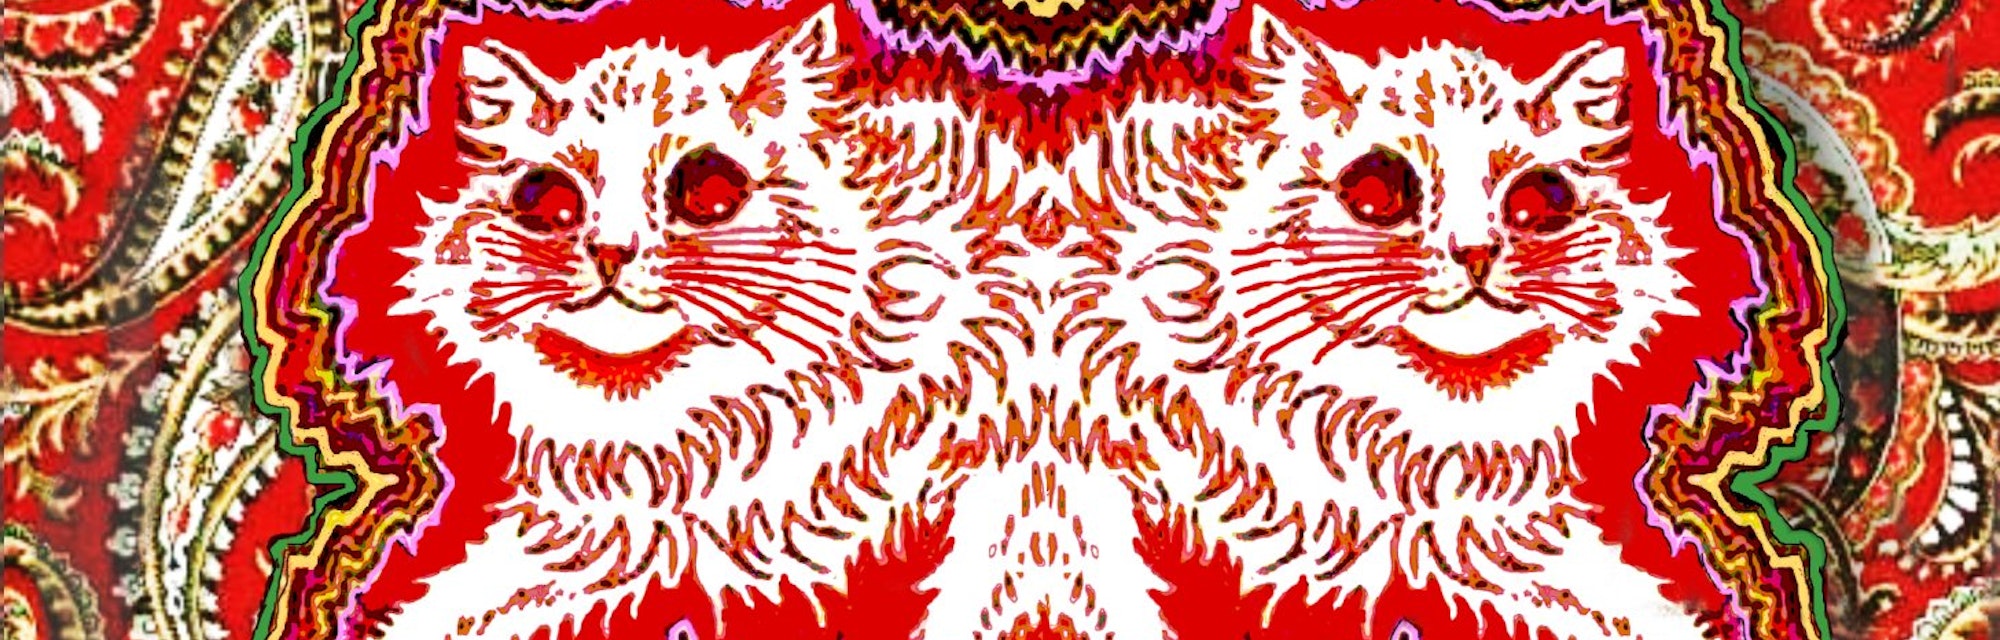 cats in psychedelic colors